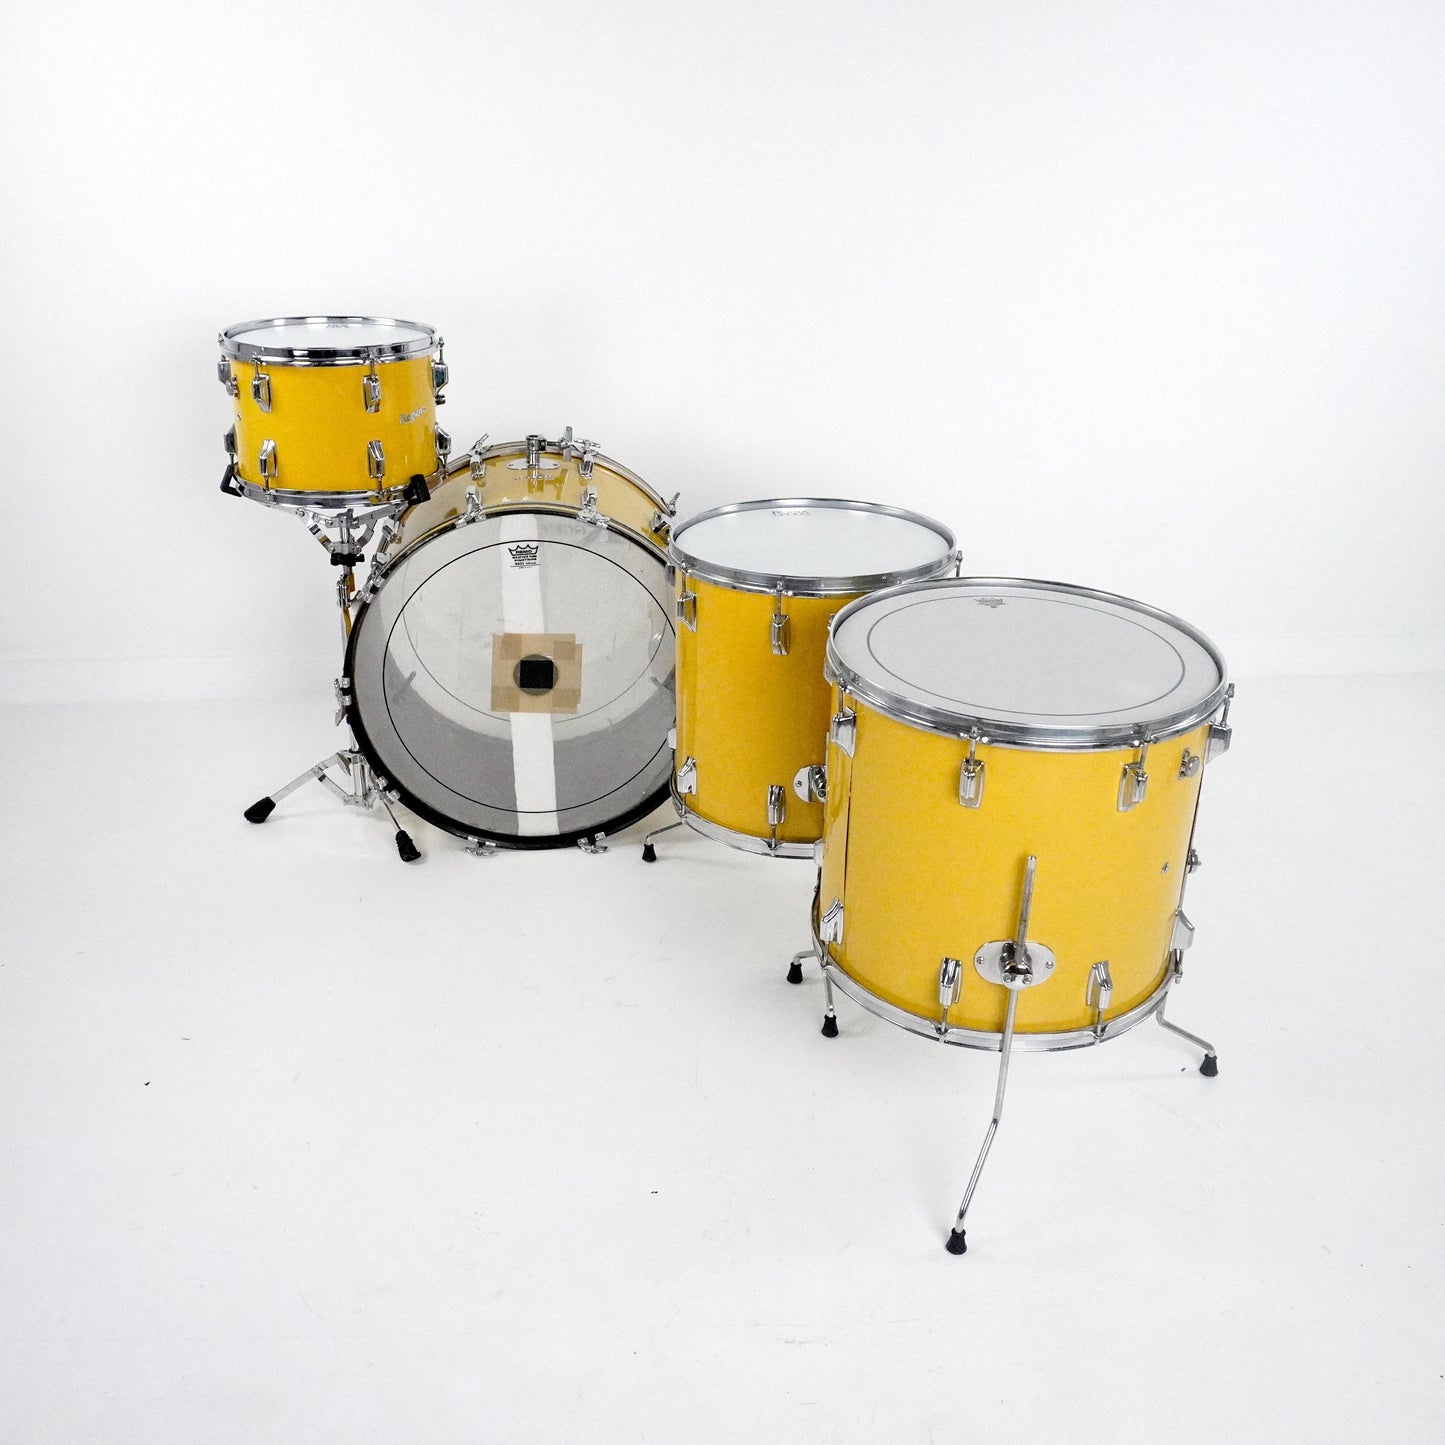 Rogers 4-Piece Ultra-Power Drum Kit in Spanish Gold (1970-1976)